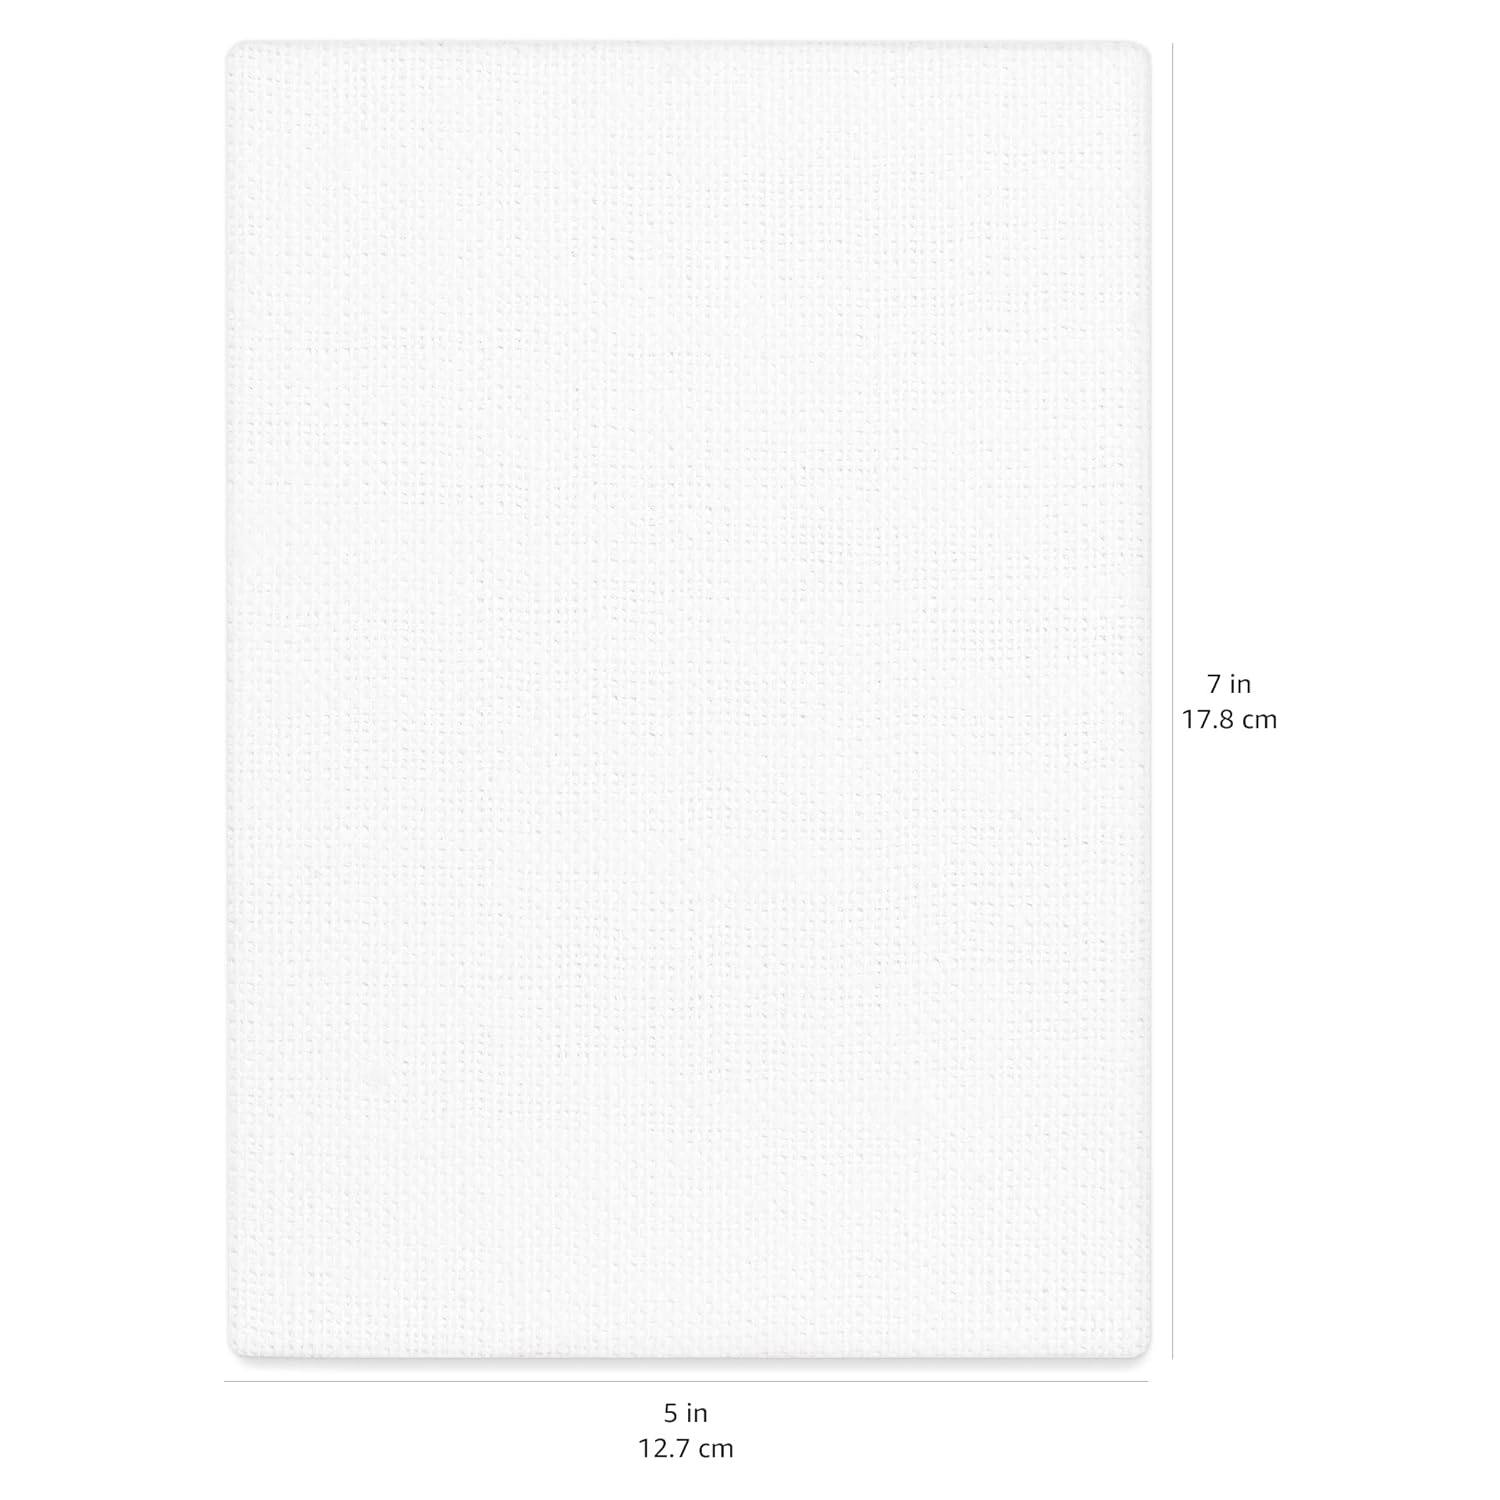 Amazon Basics Painting Canvas Panels- White, 7 in x 5 in-3744